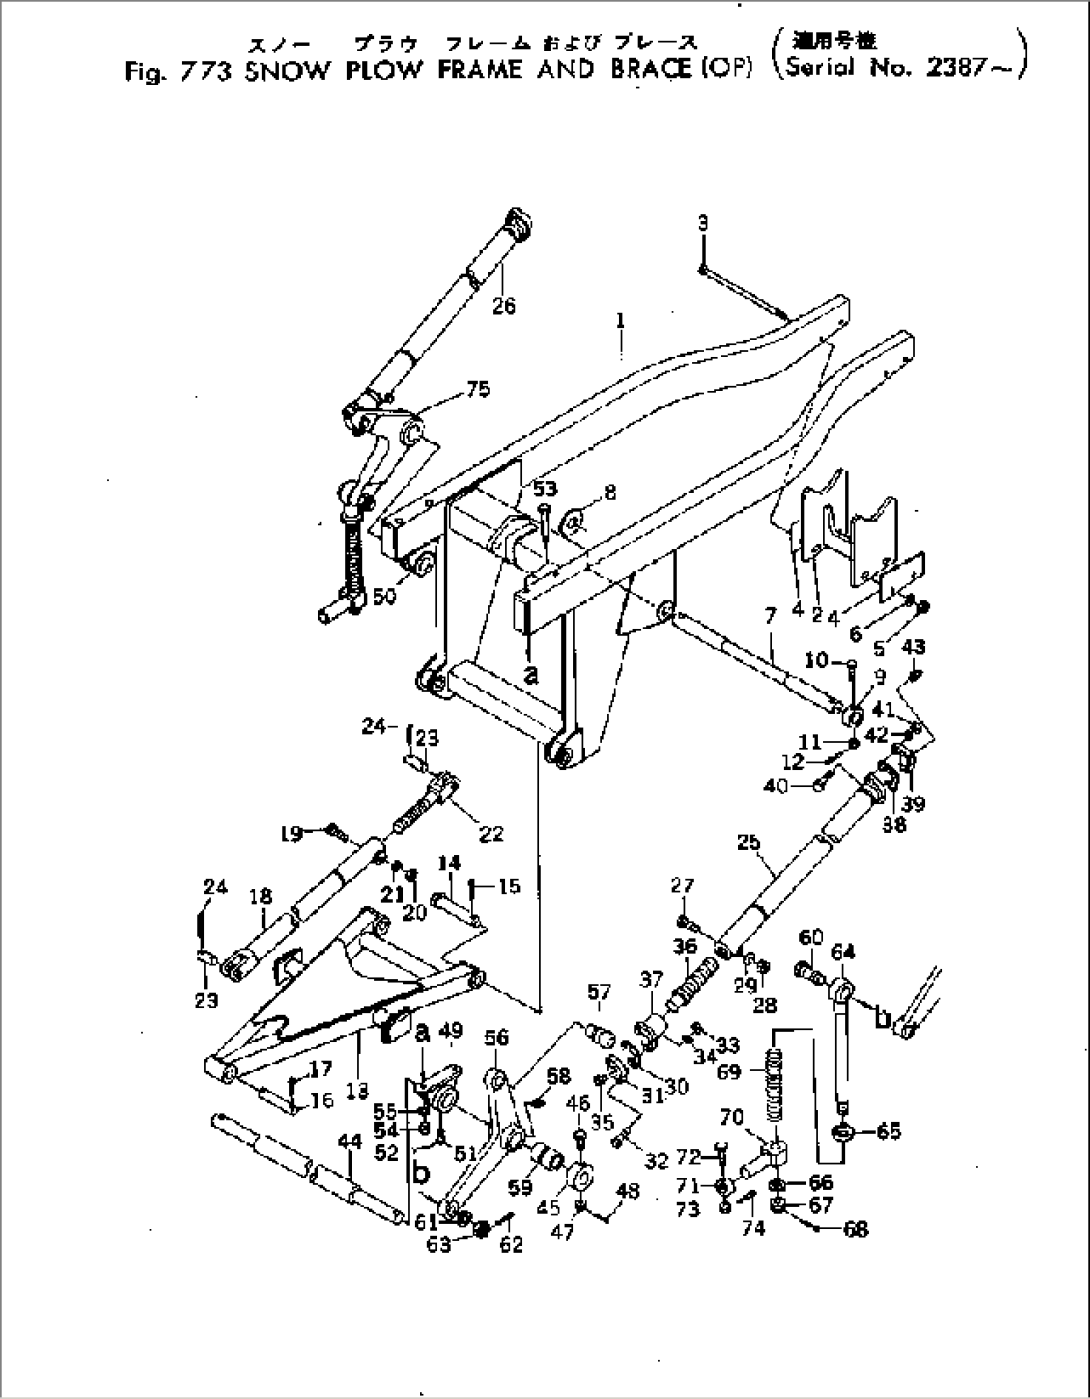 SNOW PLOW FRAME AND BRACE (OP)(#2387-)